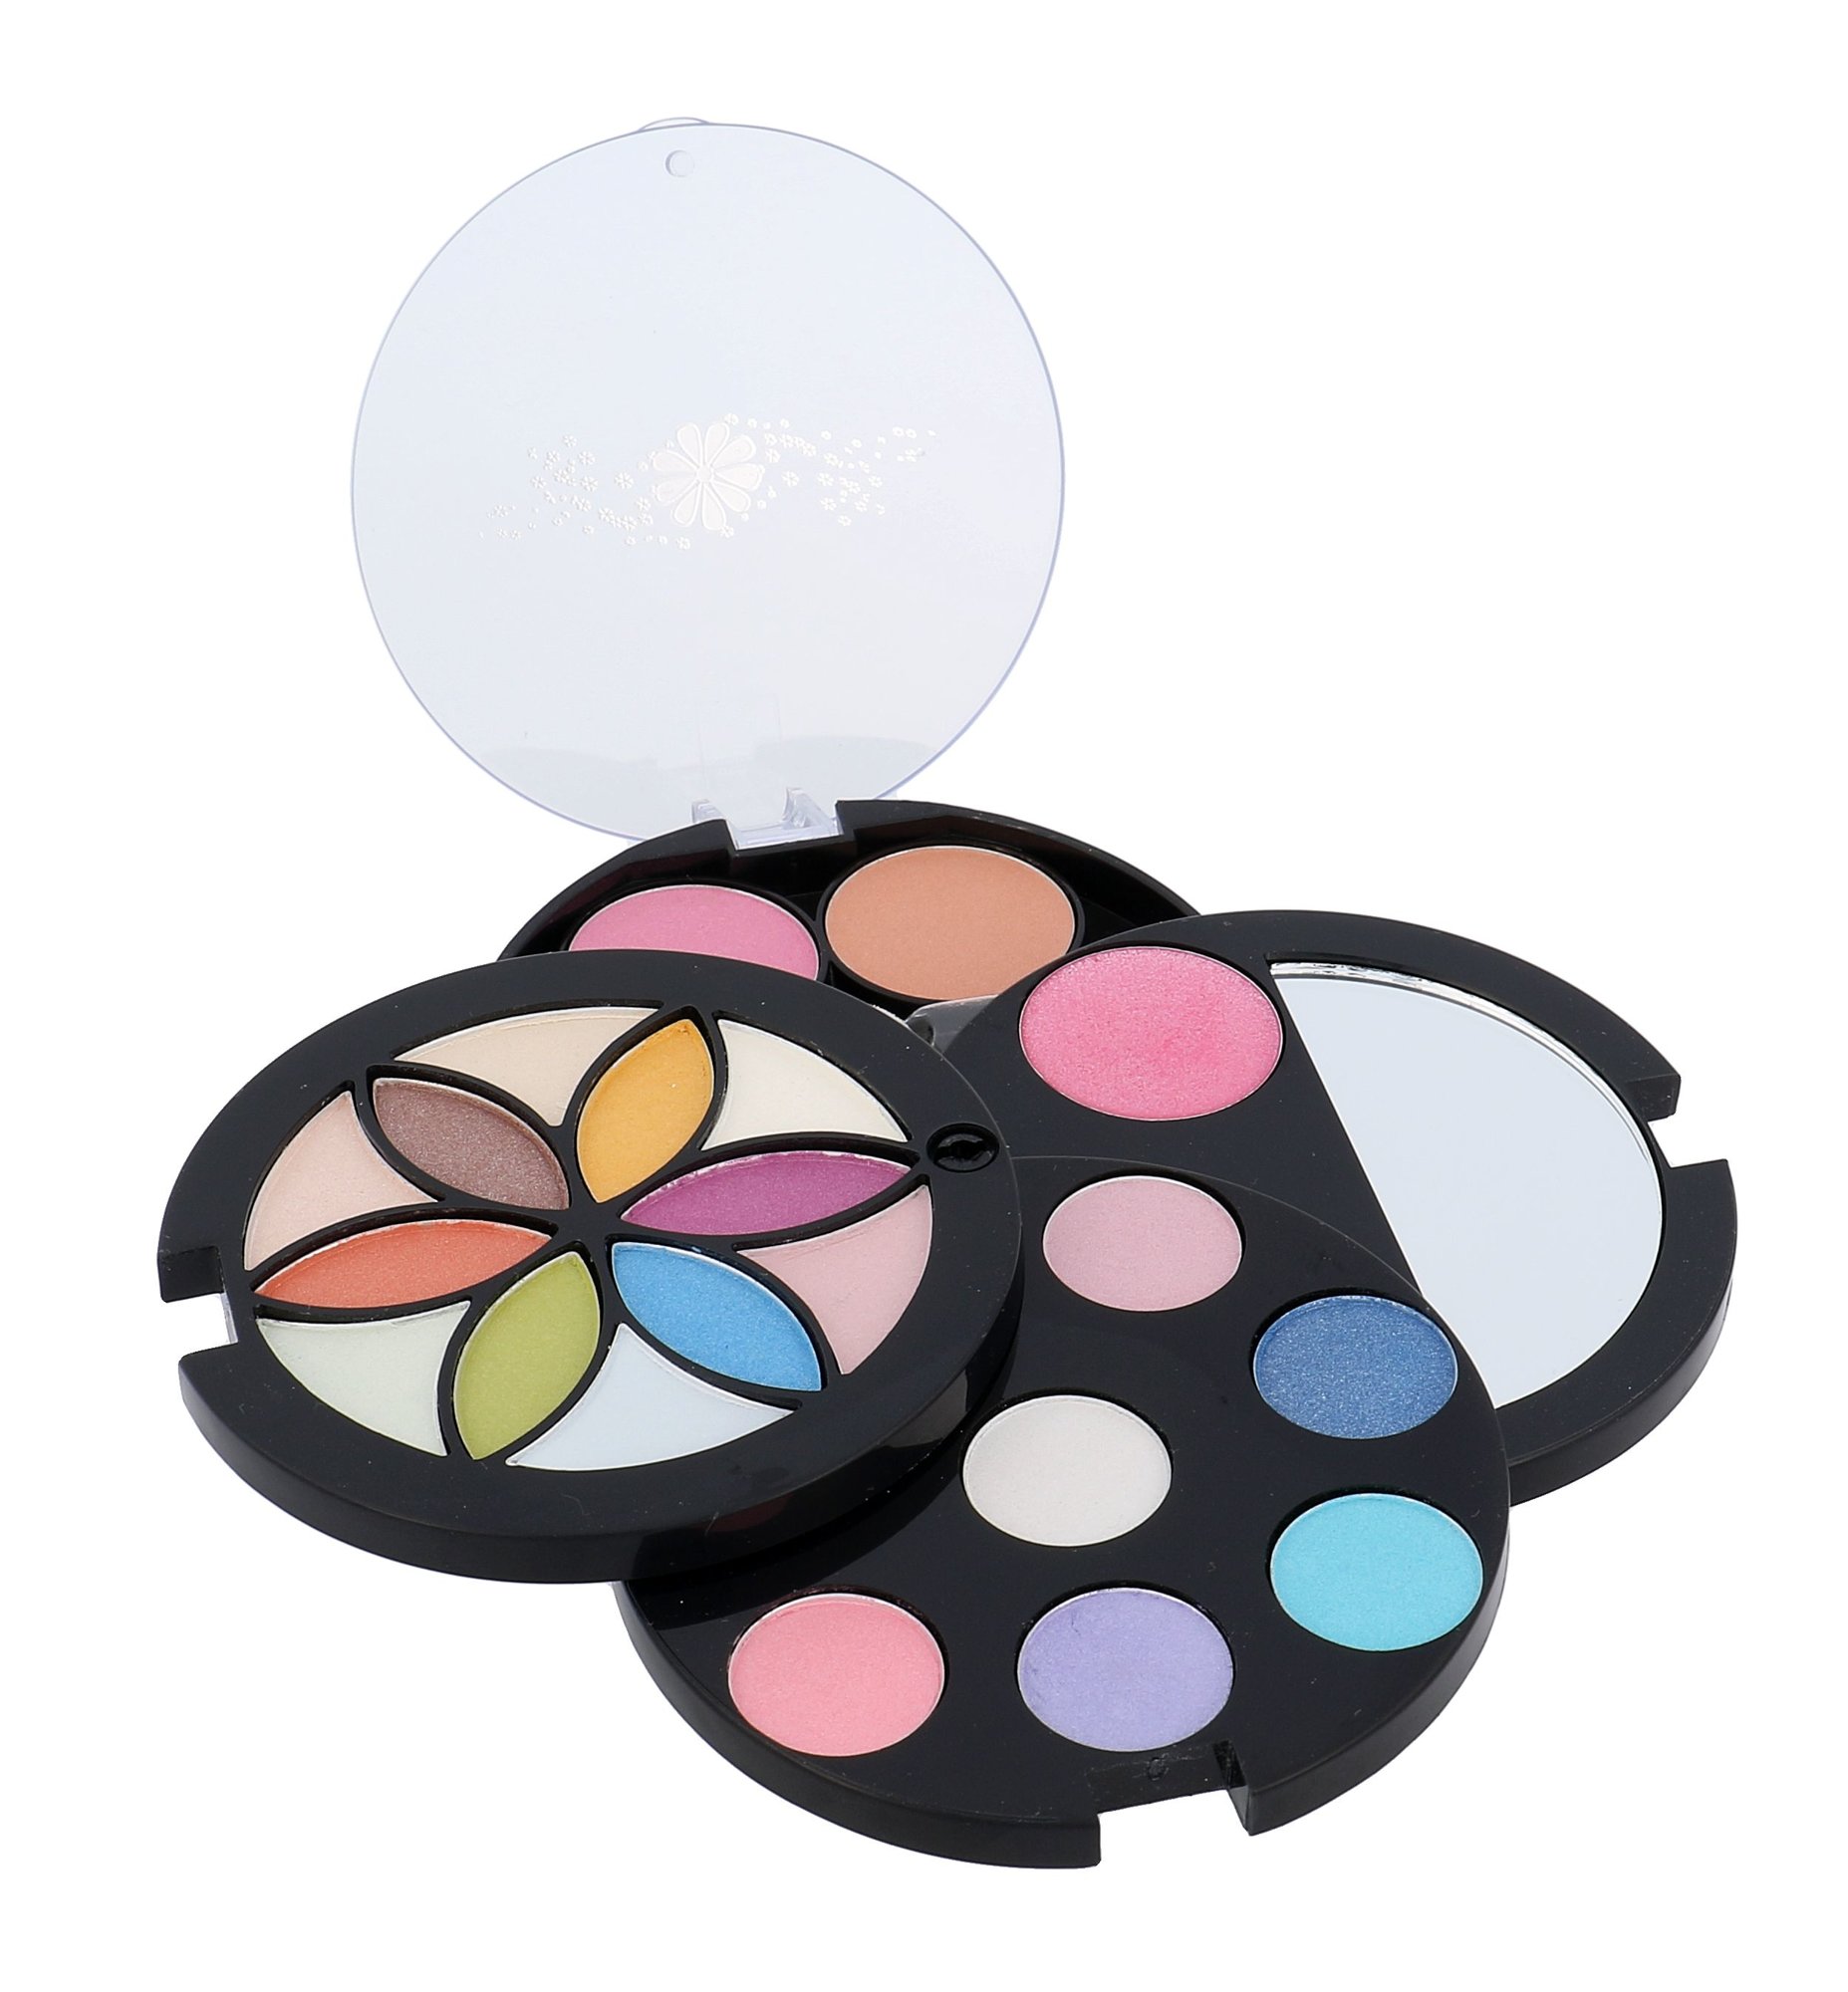 Makeup Trading Fashion Flower Compact